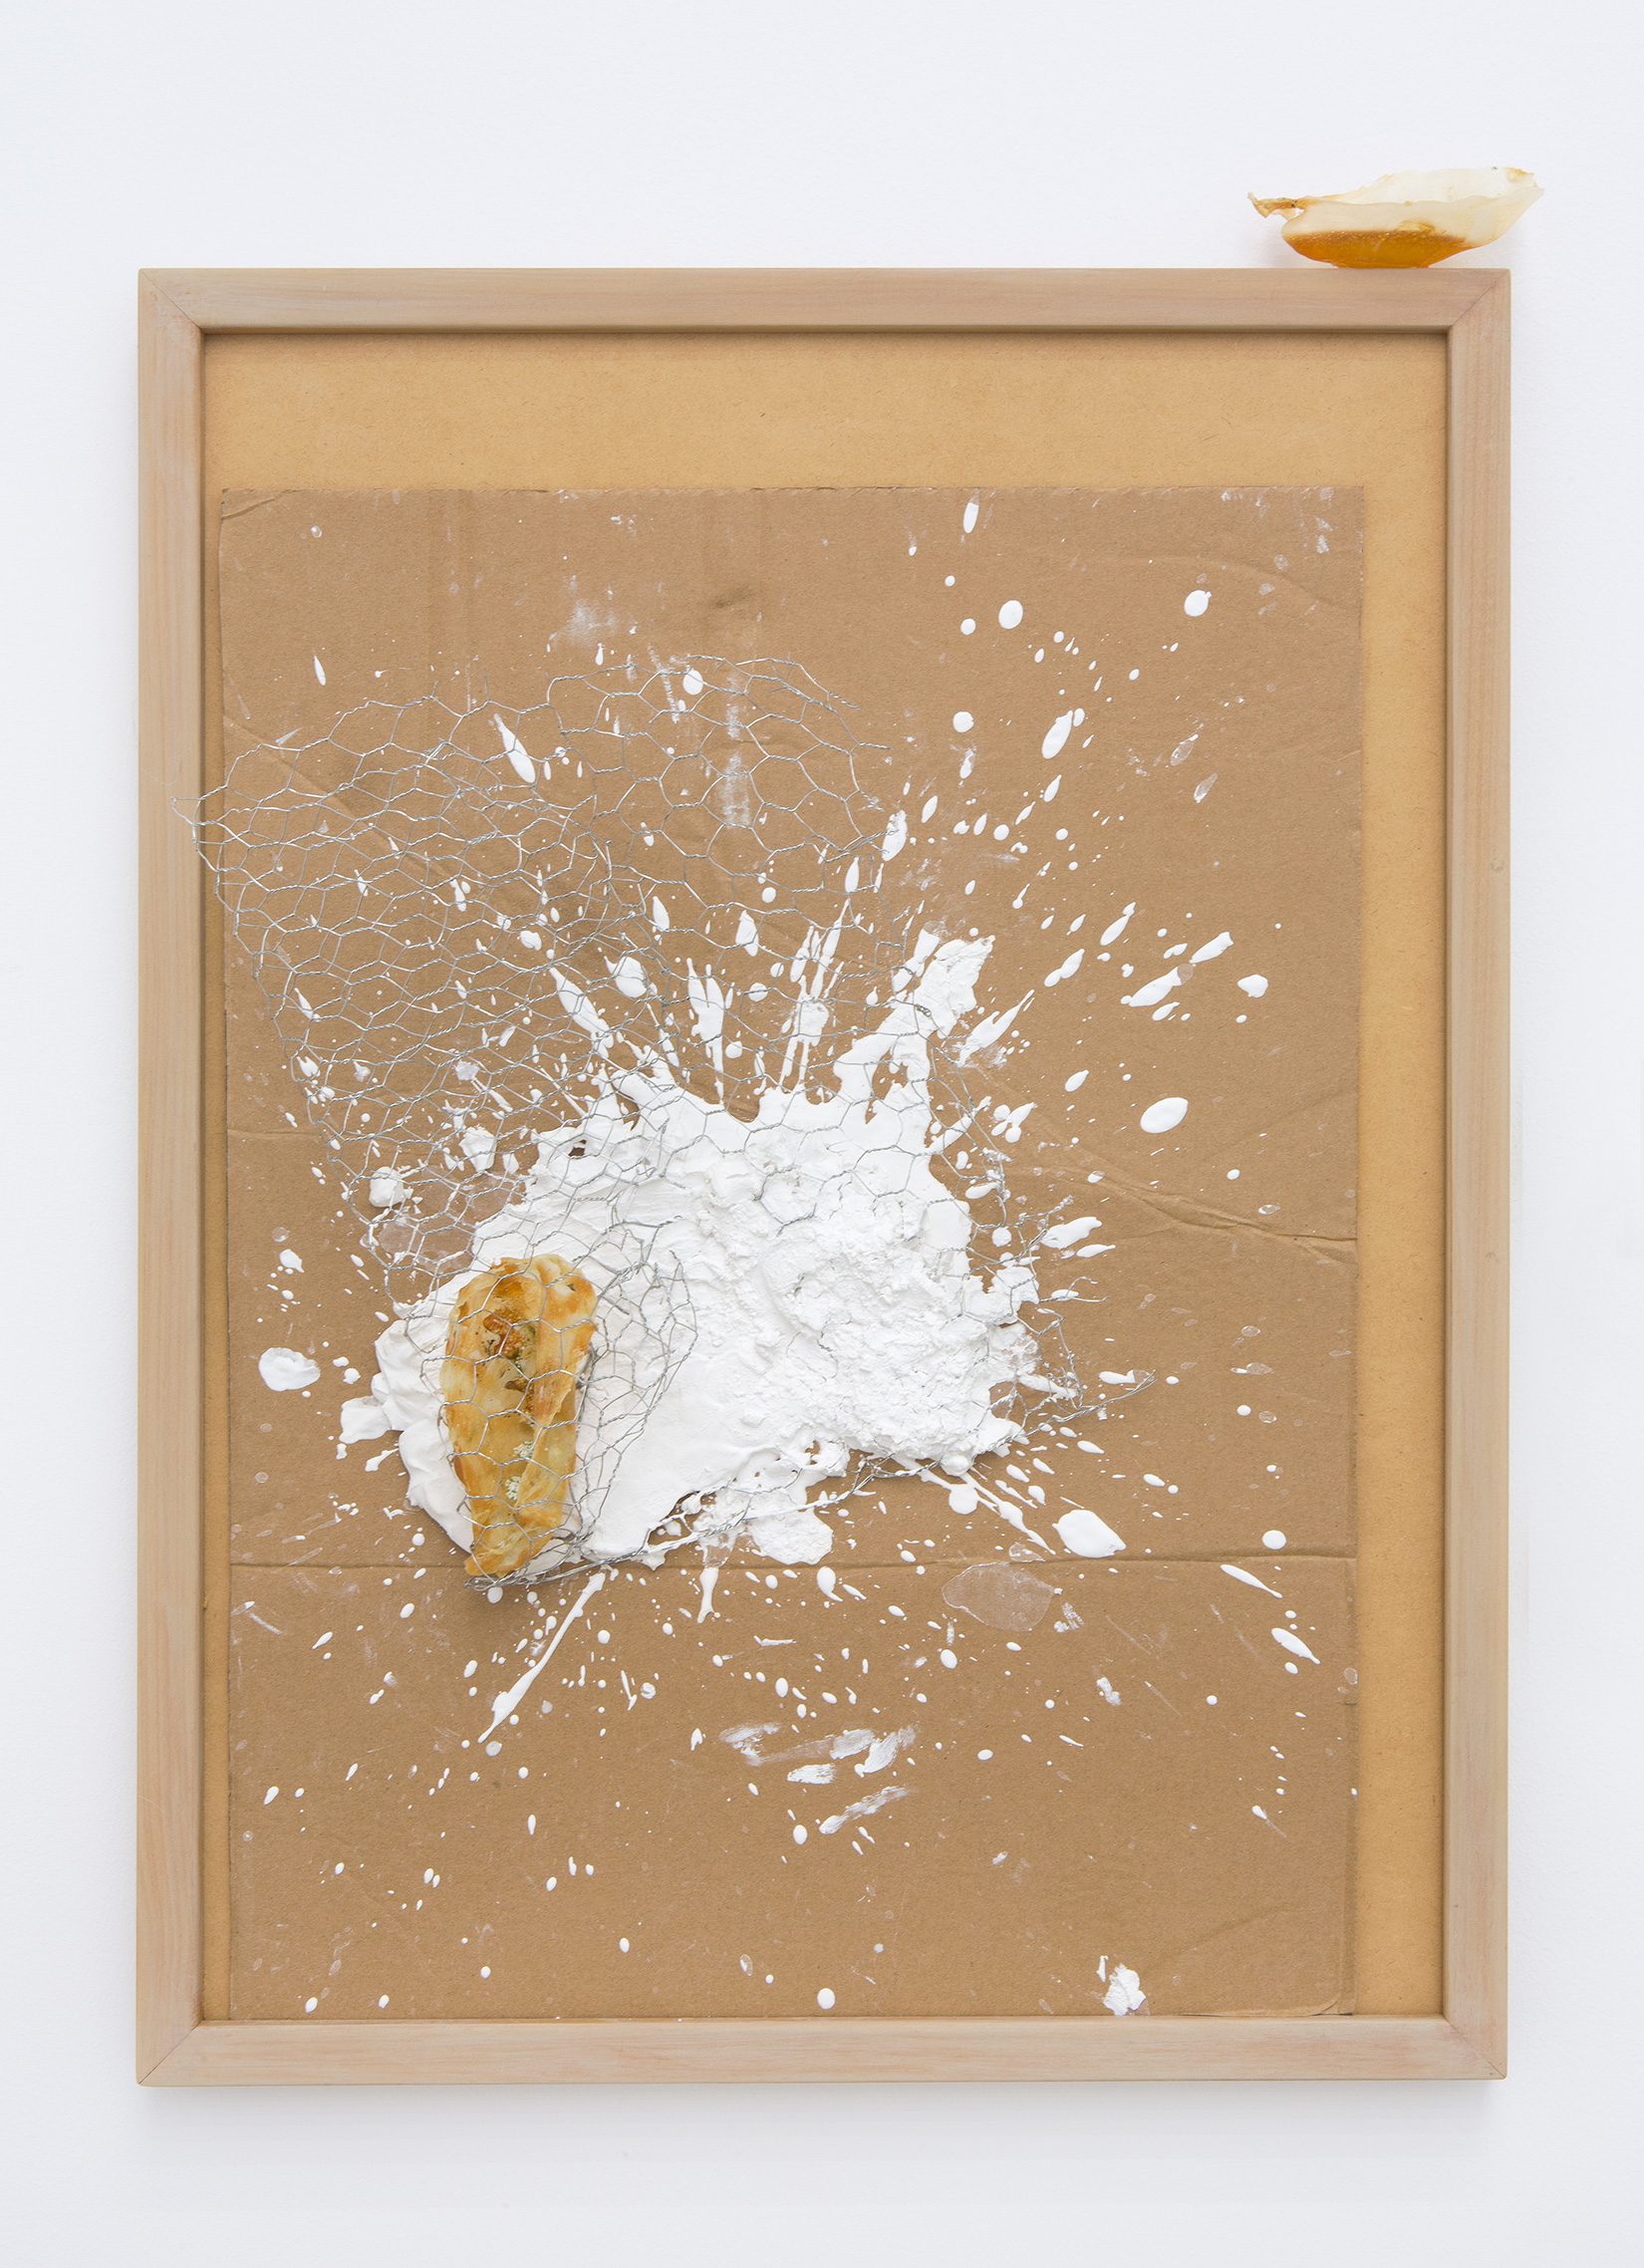 Marian Tubbs, “talked into quiet”, 2014, latex, plaster, wire, cardboard, artist frame, 440 × 620 mm